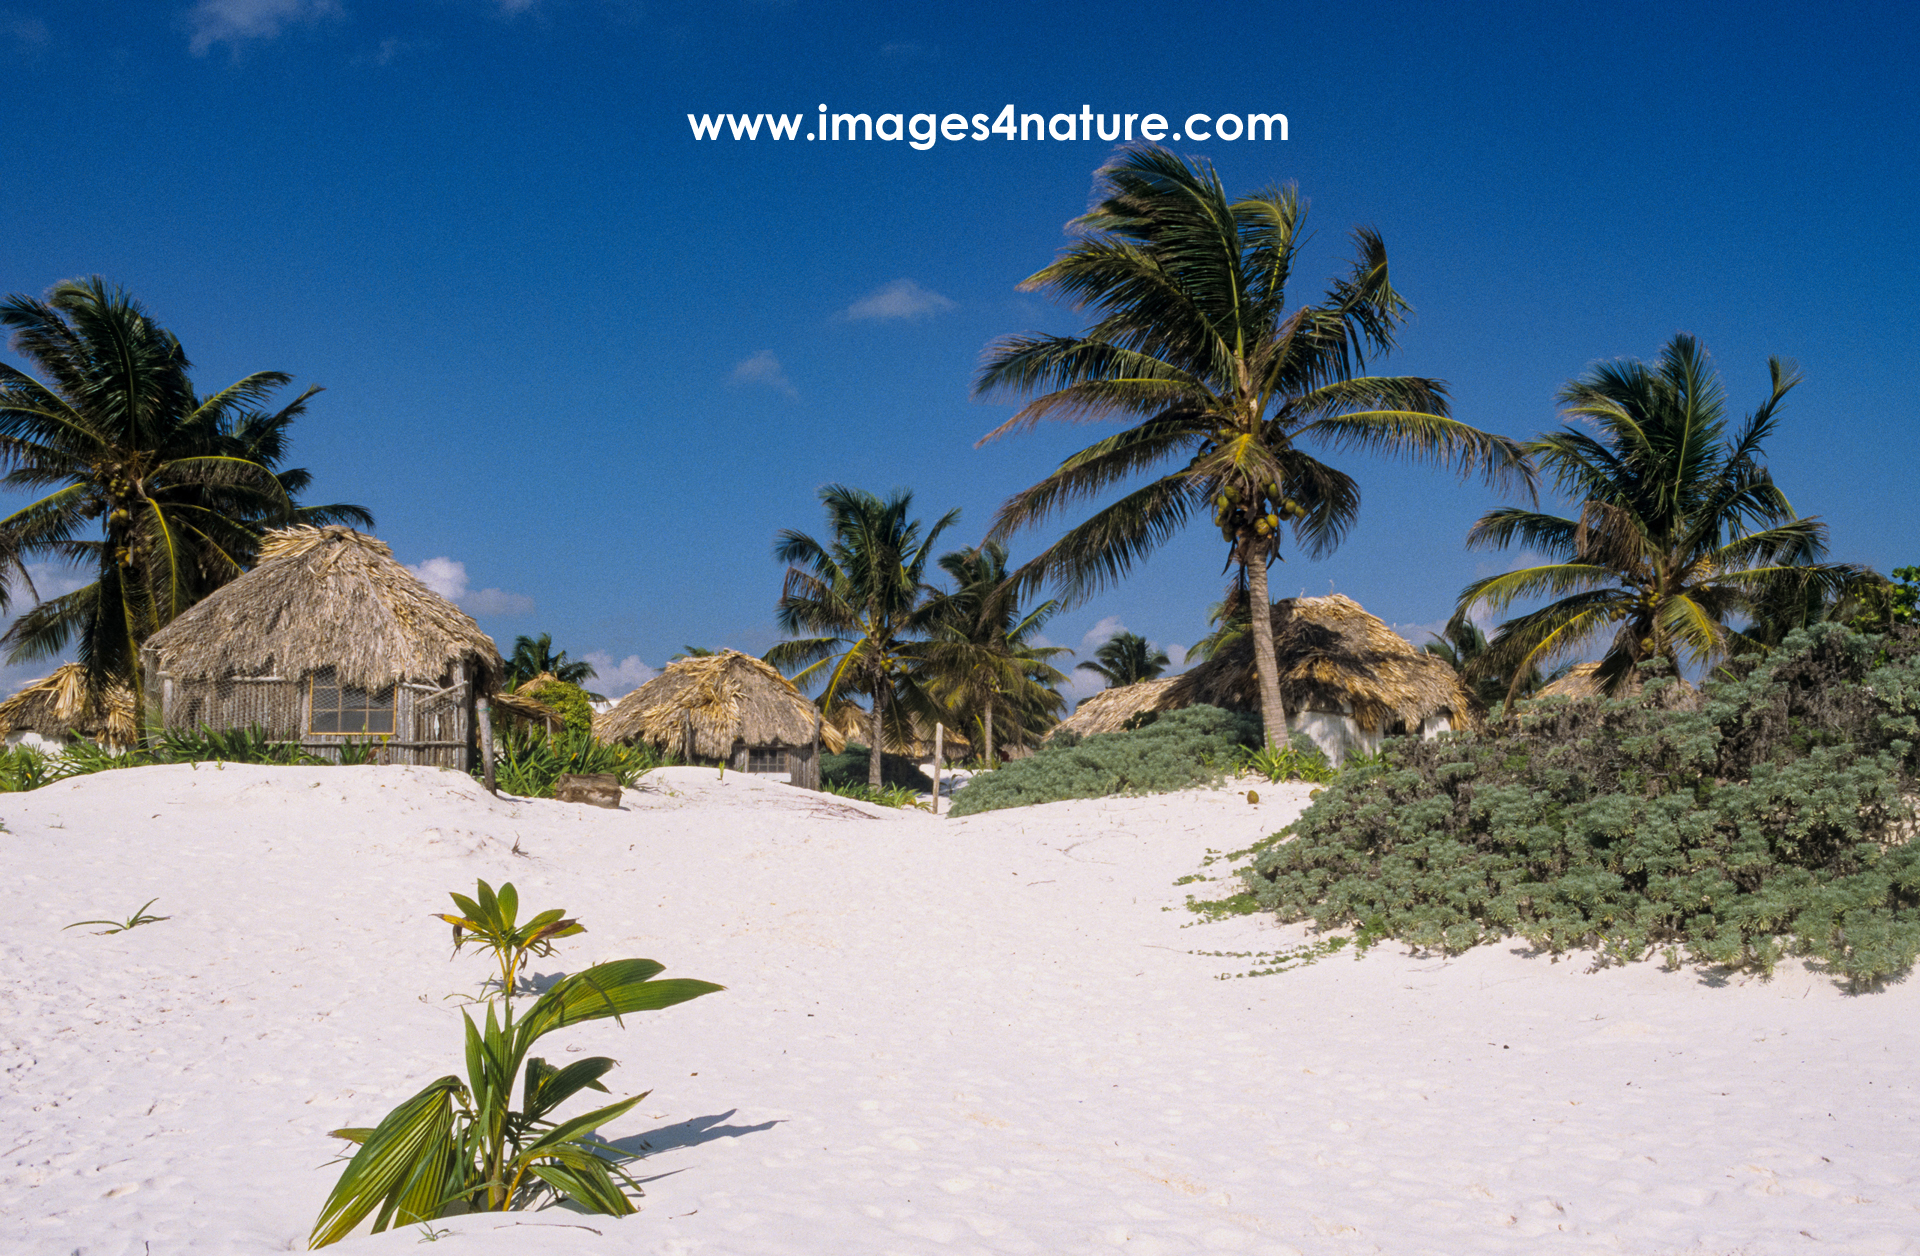 Playa del Carmen sandy beach with palms and thatched huts